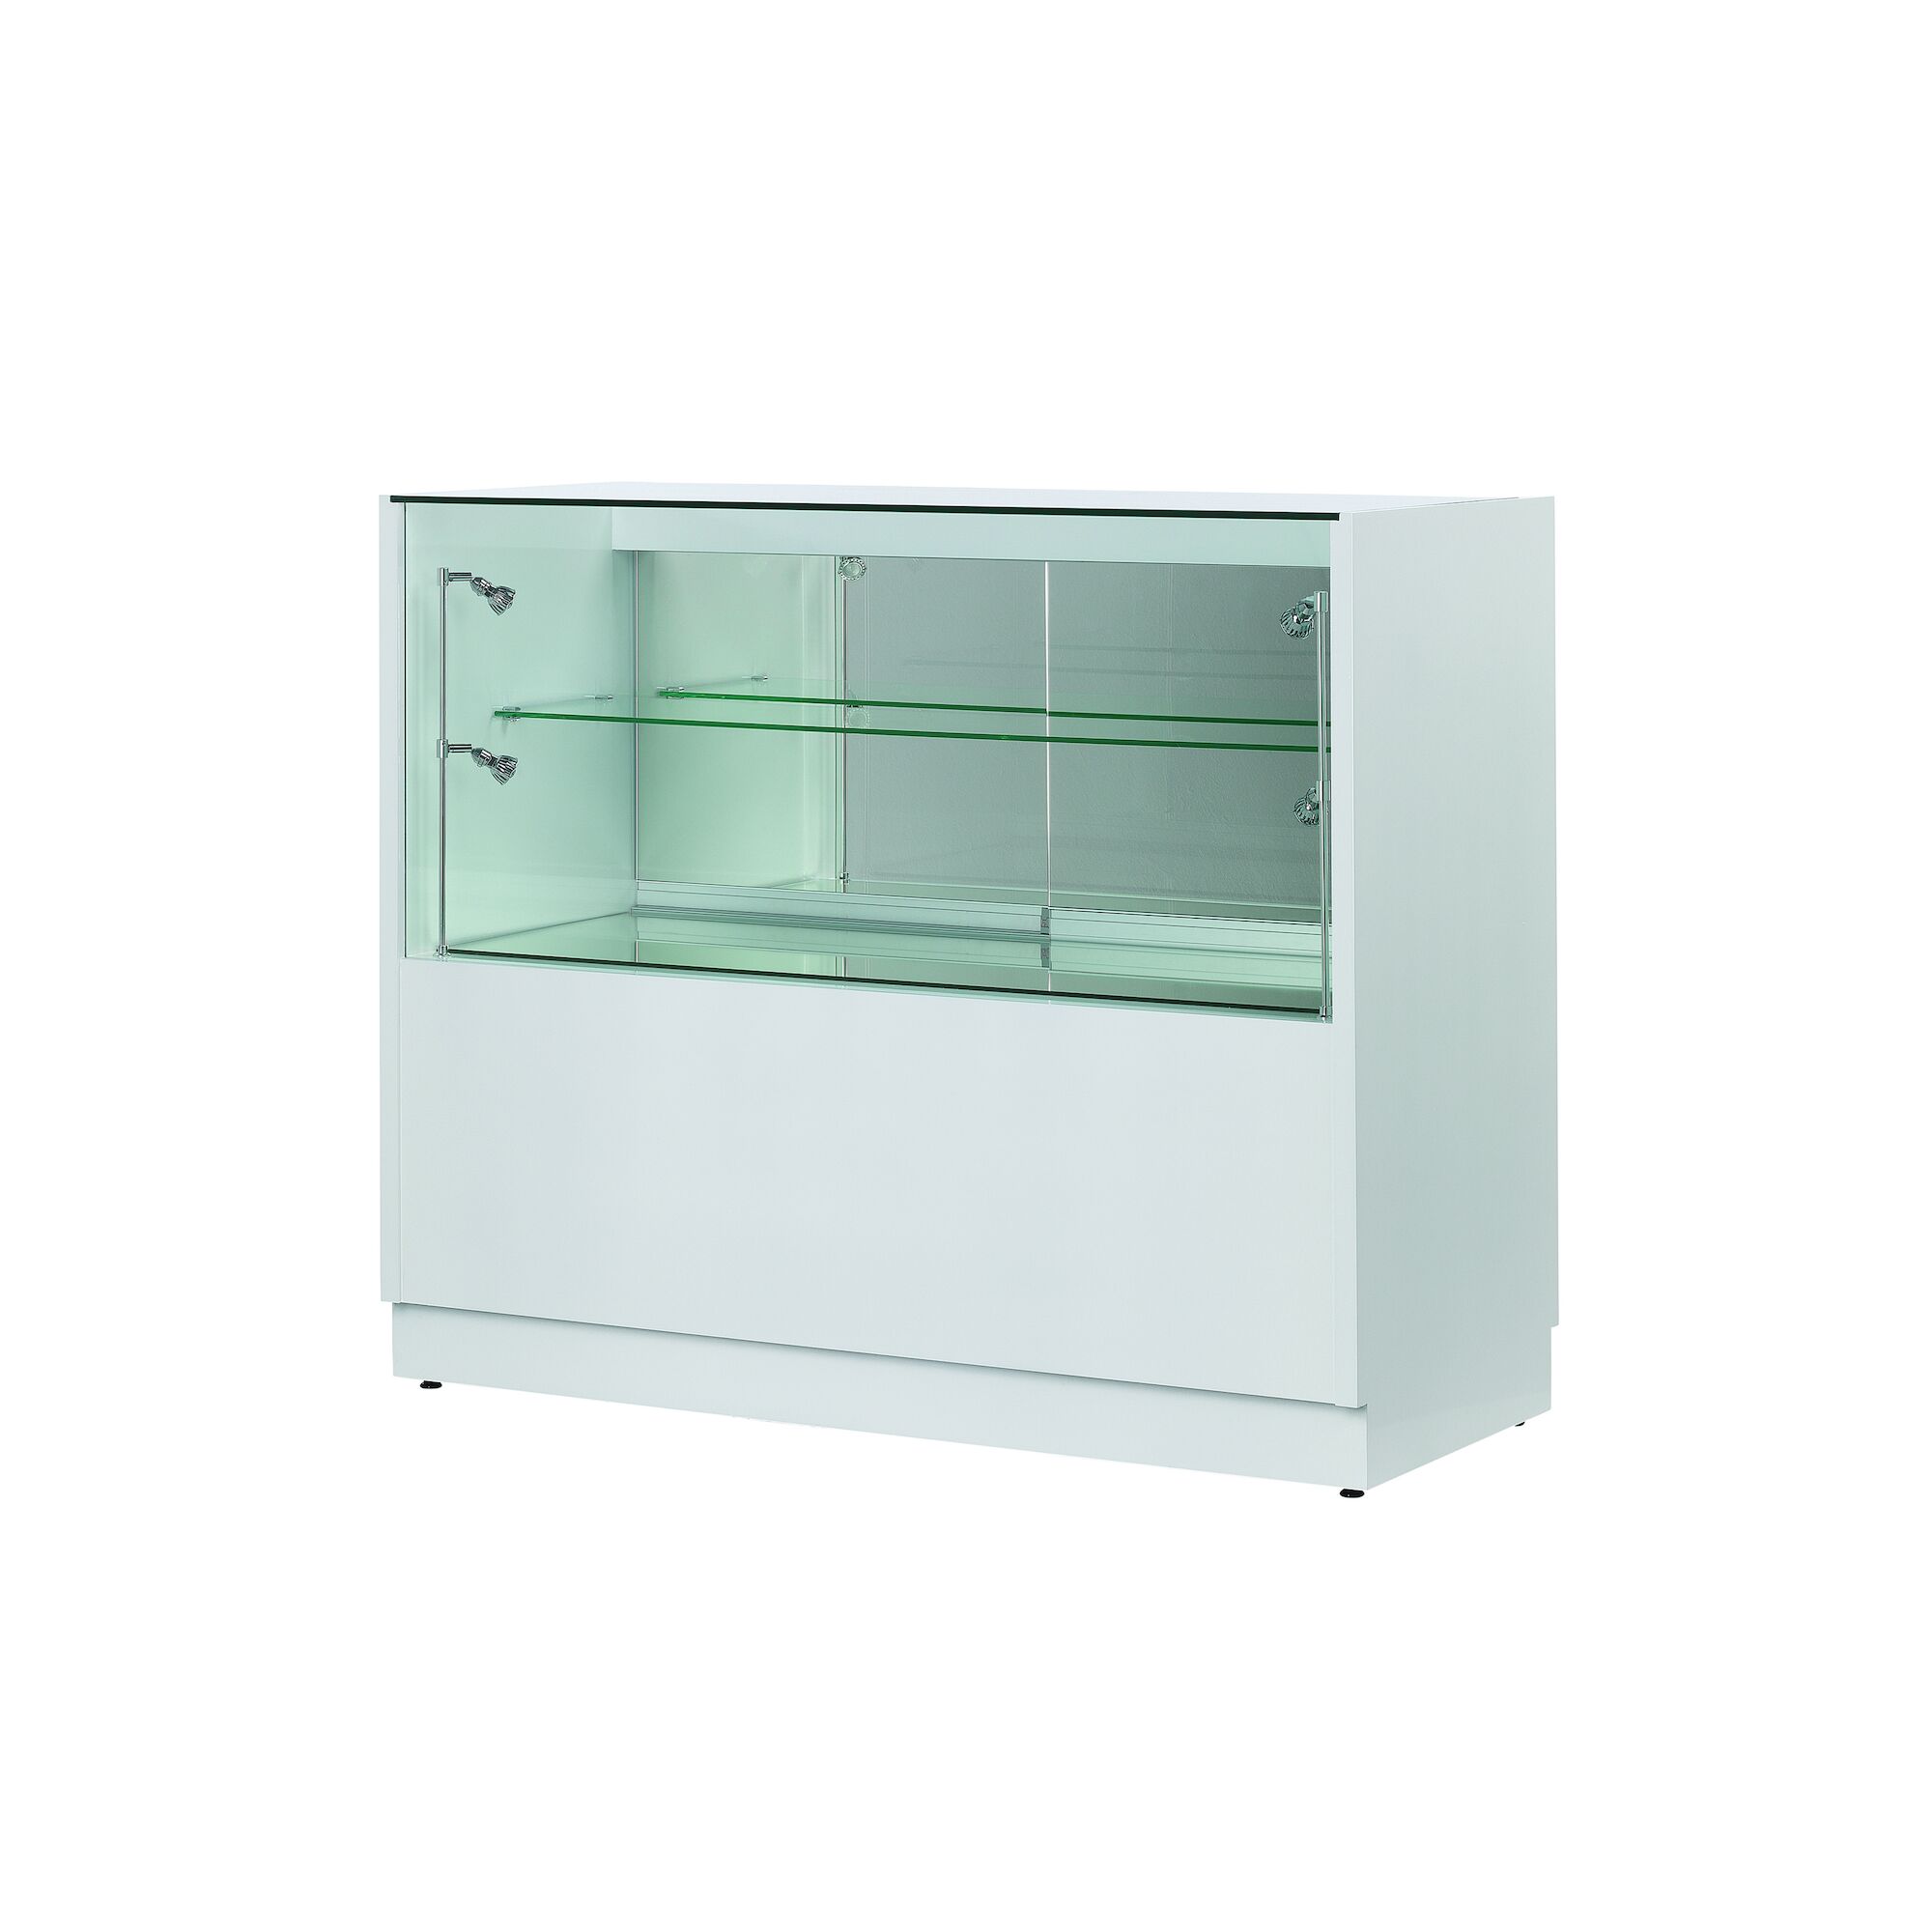 Deluxe White Gloss Shop Counters